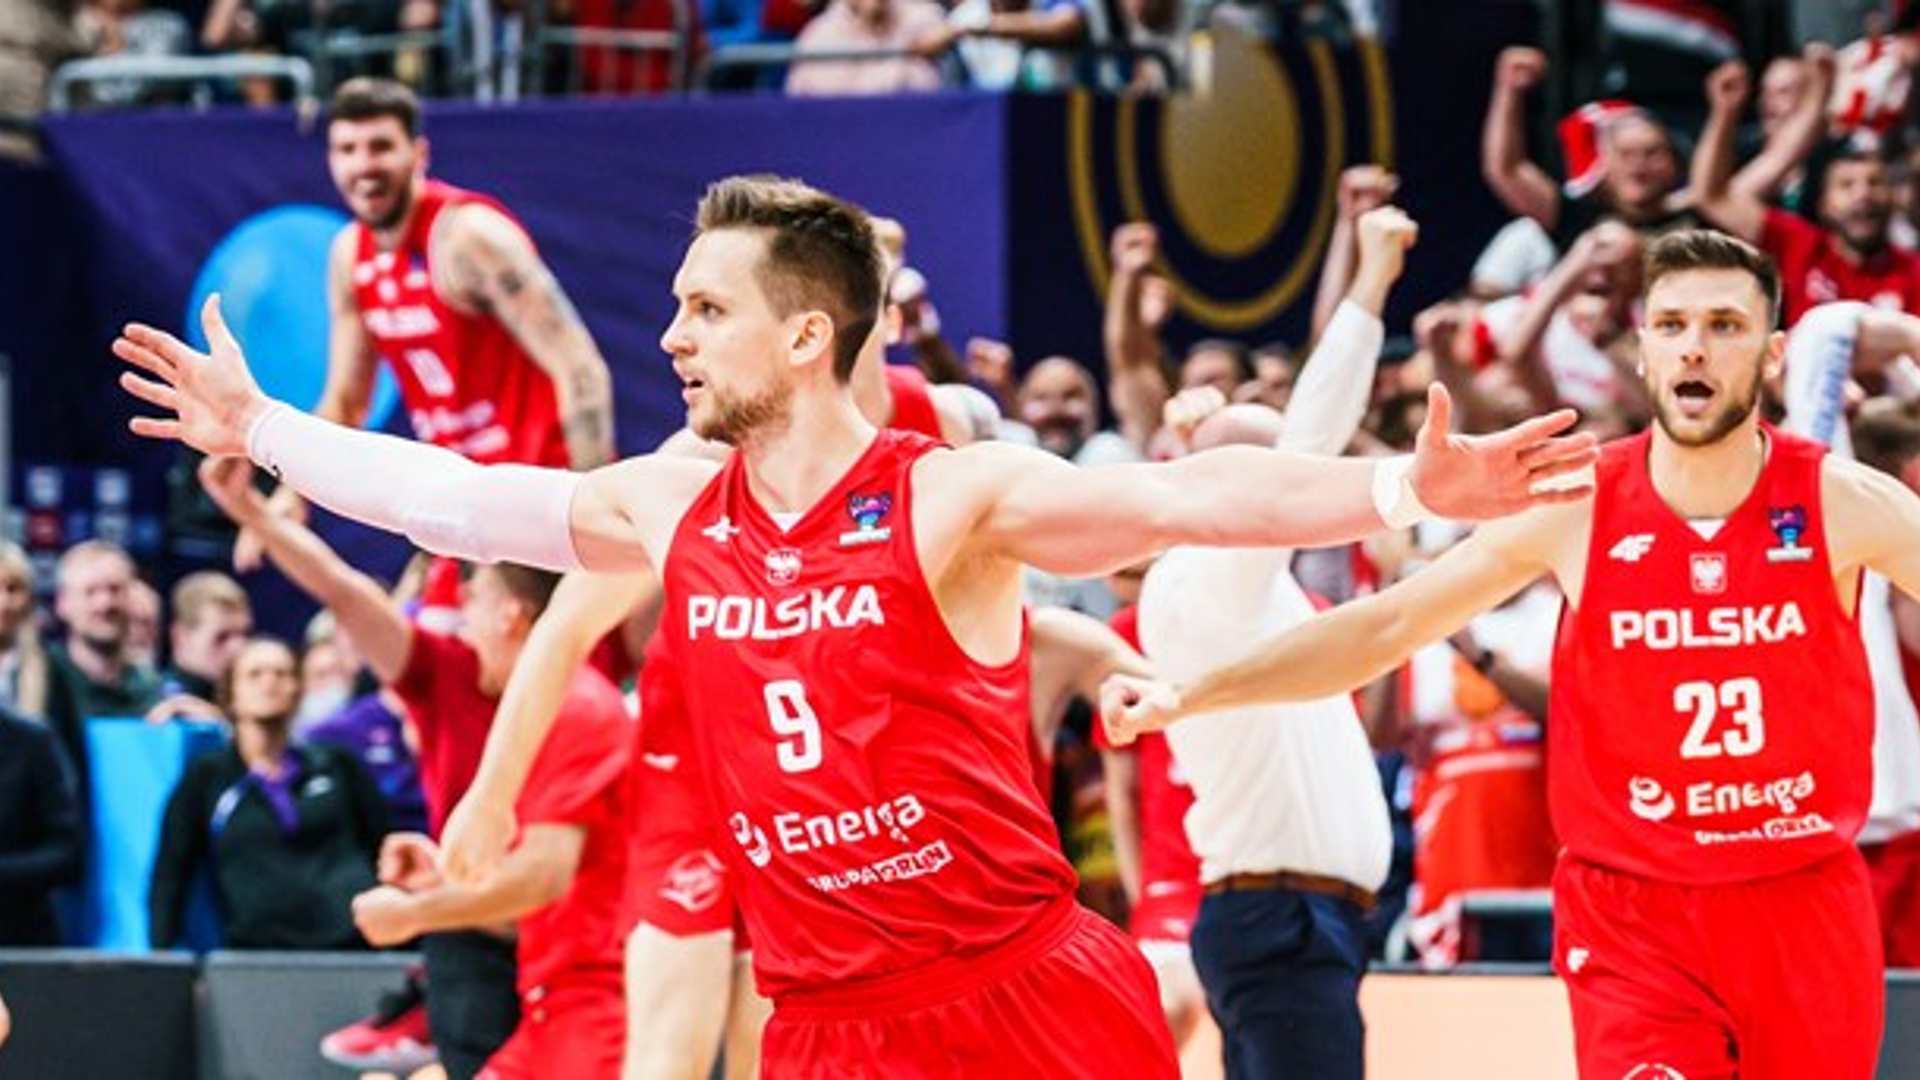 Poland vs France will take place at Arena Berlin for a EuroBasket 2022 Final Round match on September 16.